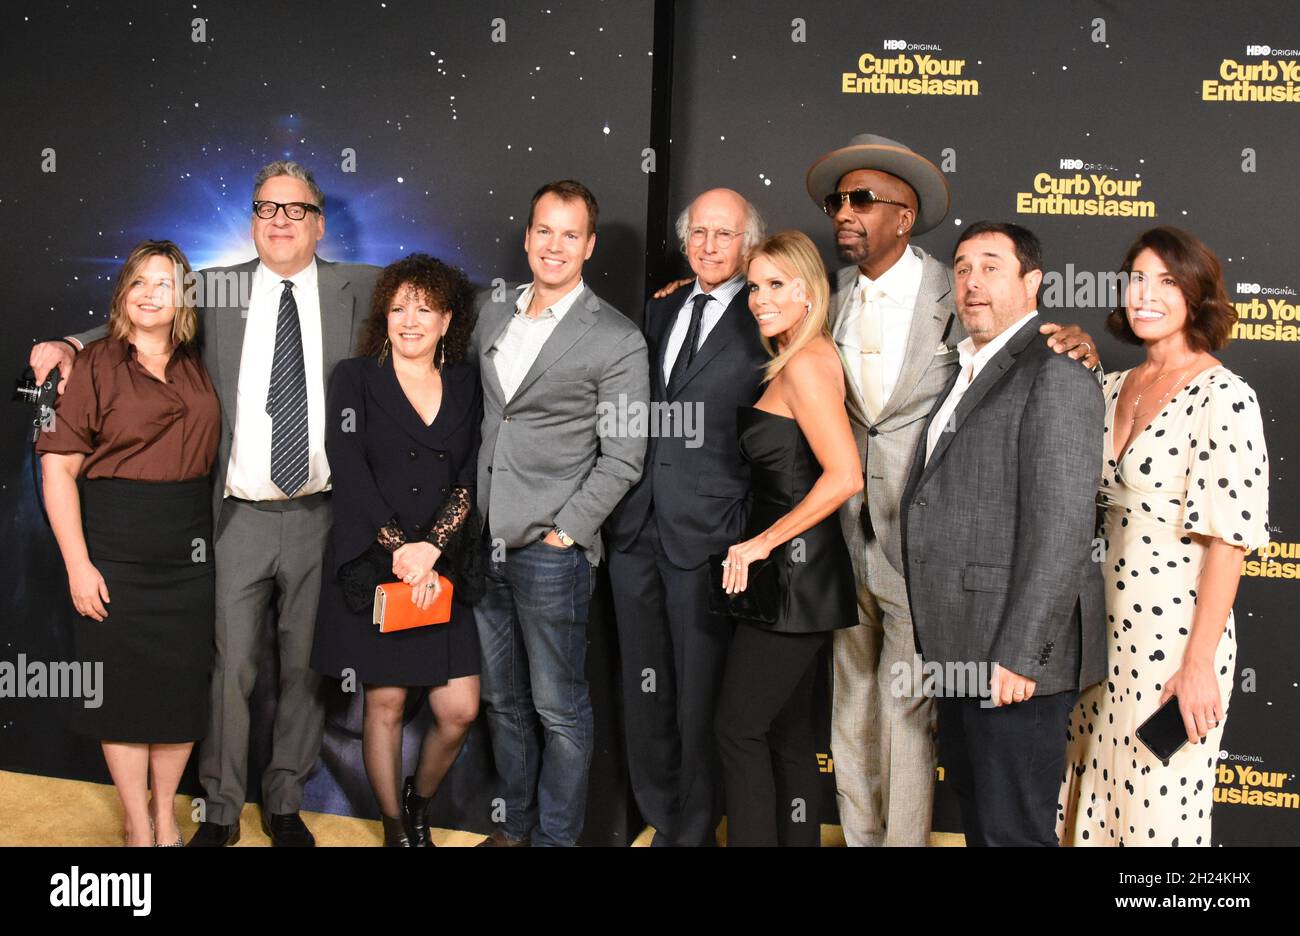 Los Angeles, California, USA 19th October 2021 (L-R) Executive Vice President of HBO Programming Amy Gravitt, Actor Jeff Garlin, Actress Susie Essman, Chief Content Officer HBO & HBO Max Casey Bloys, Actor Larry David, Producer Jeff Schaffer, Actress Cheryl Hines and Actor J.B. Smoove attend HBO's 'Curb Your Enthusiasm' Season 11 Premiere at Paramount Theatre on October 19, 2021 in Los Angeles, California, USA. Photo by Barry King/Alamy Live News Stock Photo